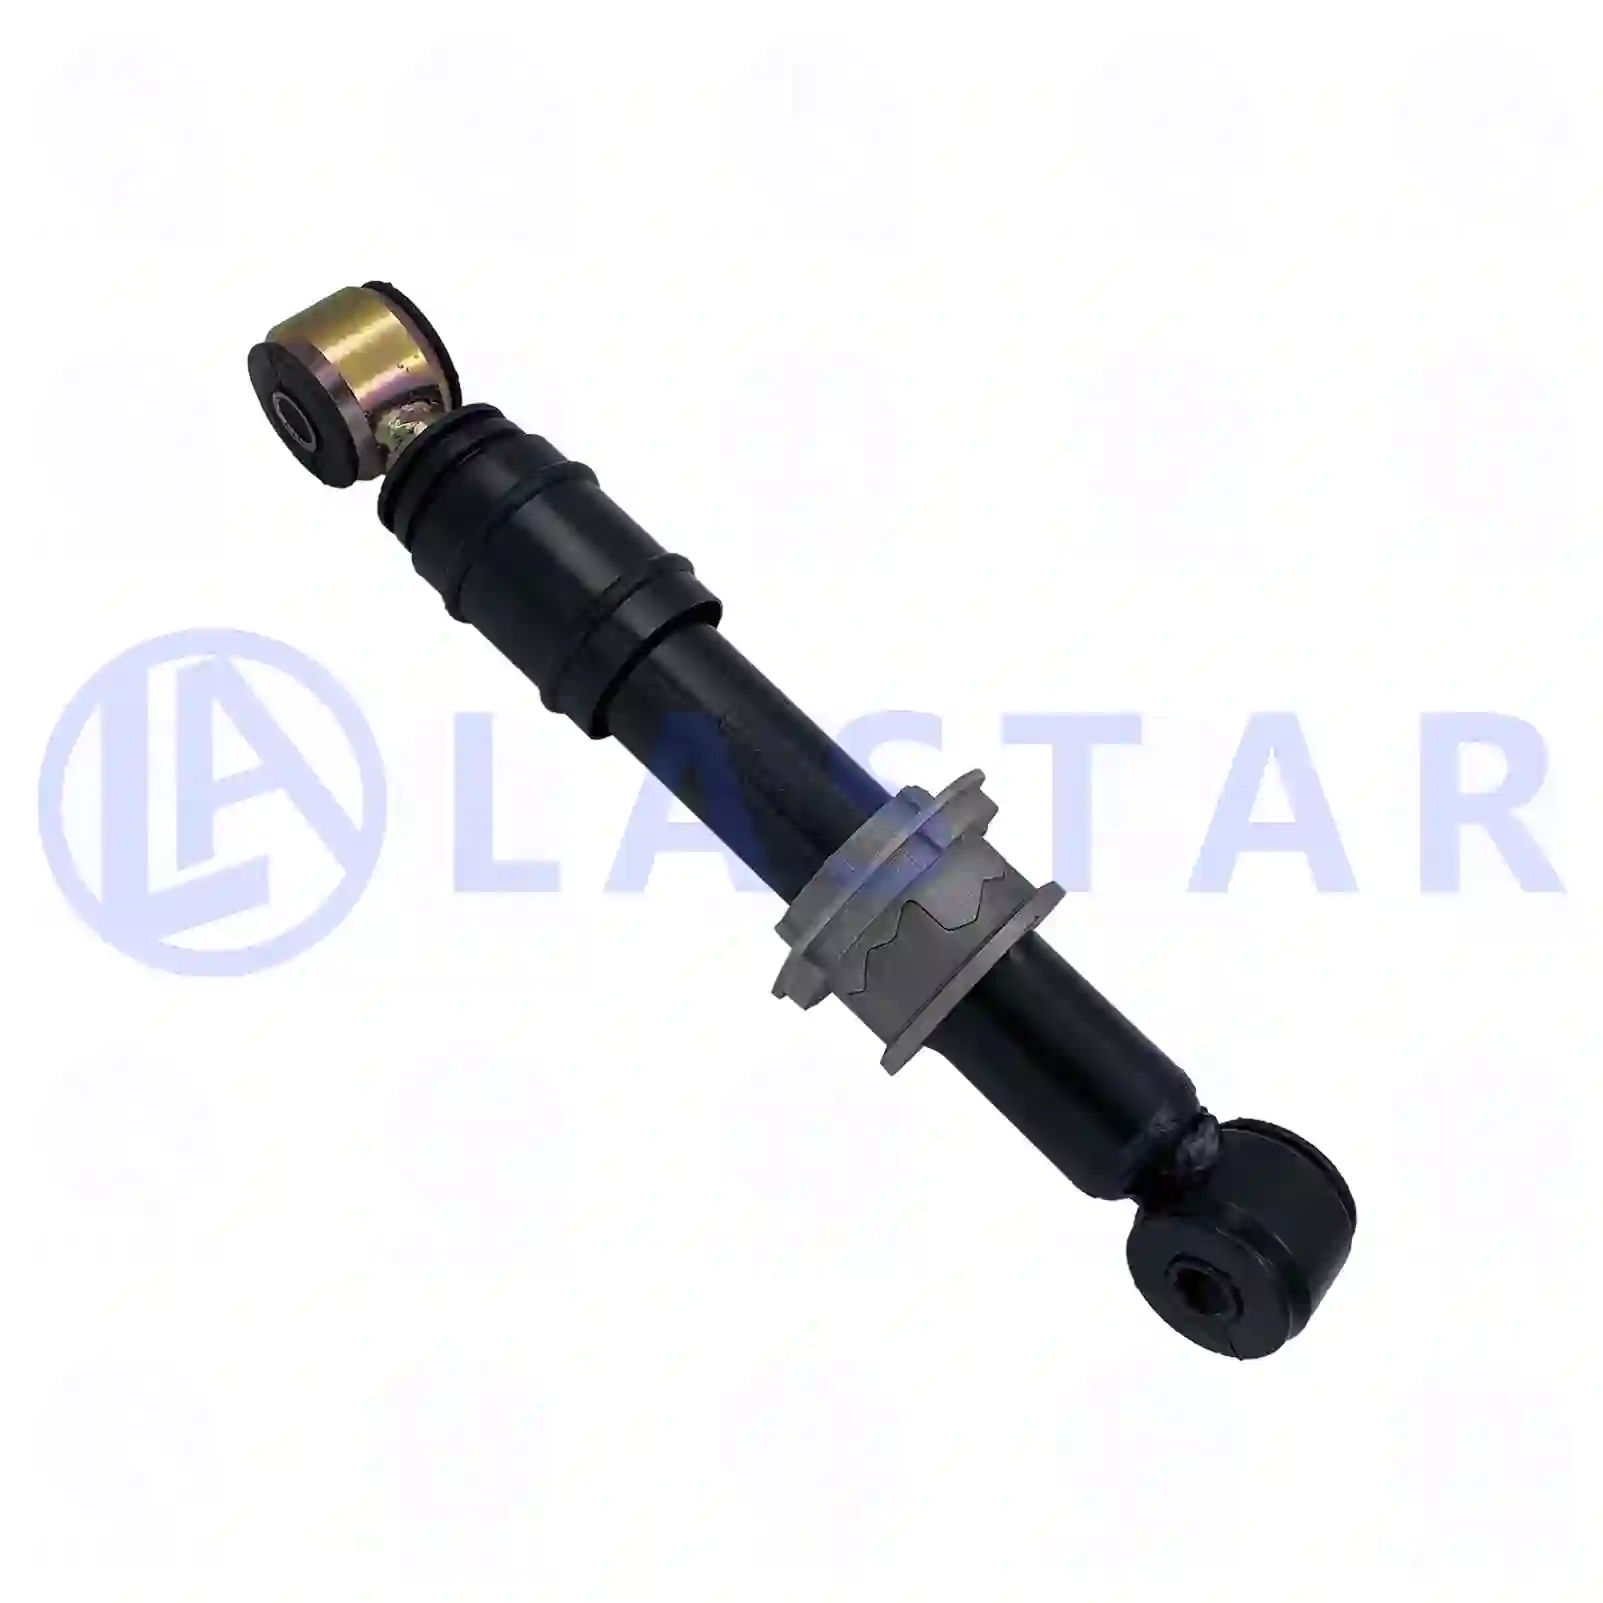 Cabin shock absorber, 77735739, 1075445, , , ||  77735739 Lastar Spare Part | Truck Spare Parts, Auotomotive Spare Parts Cabin shock absorber, 77735739, 1075445, , , ||  77735739 Lastar Spare Part | Truck Spare Parts, Auotomotive Spare Parts